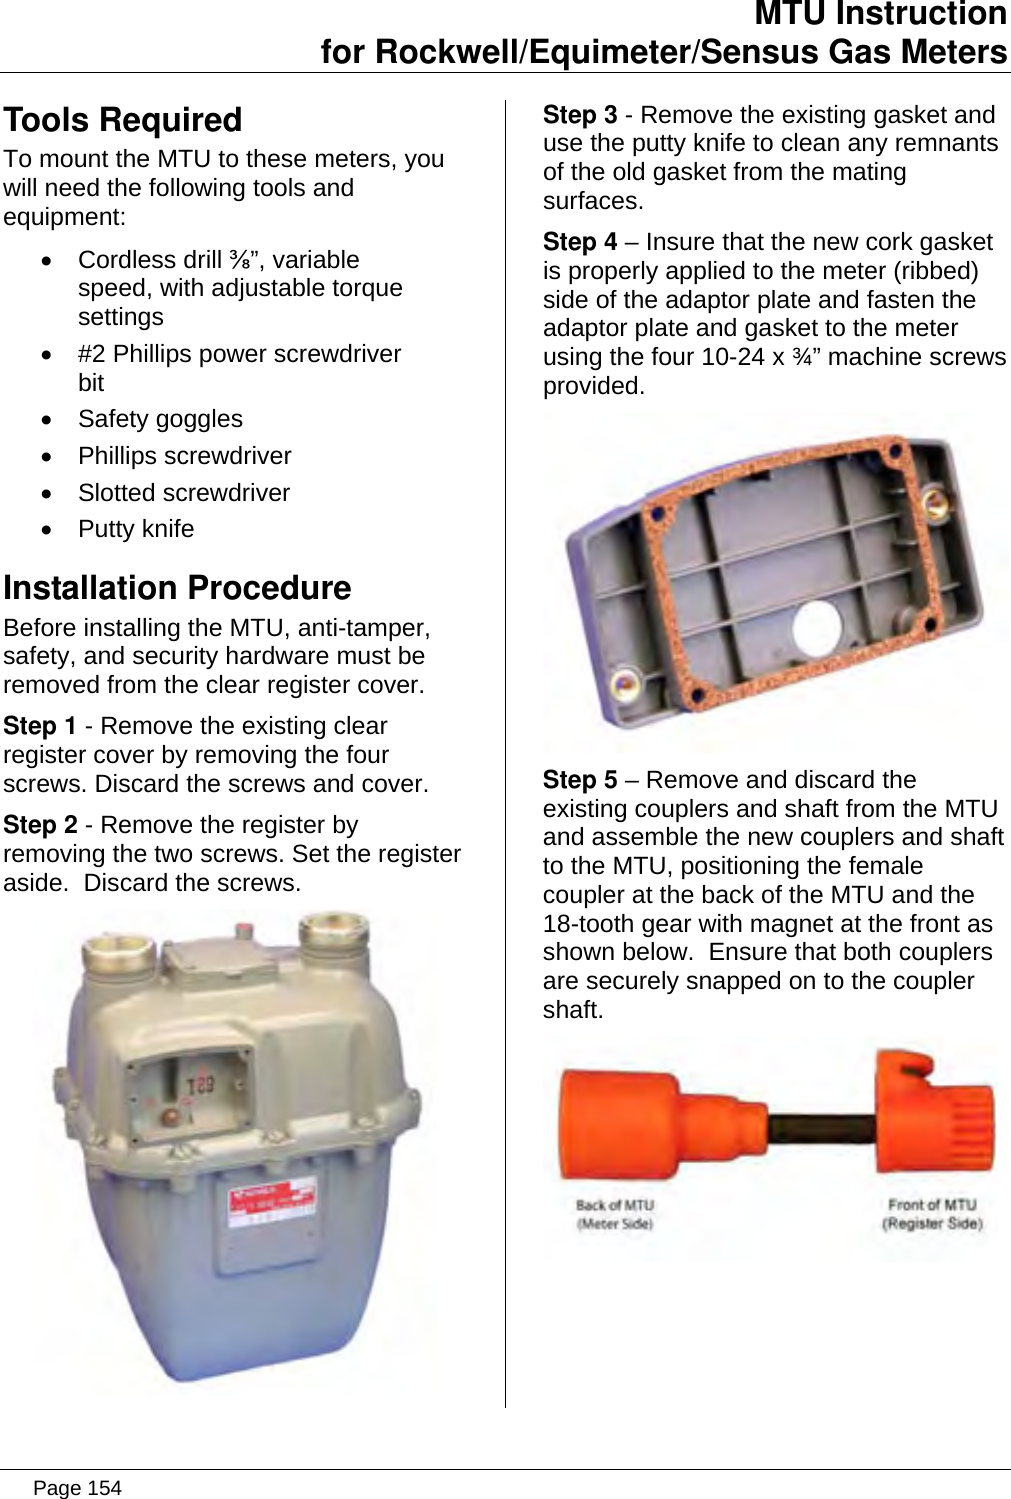 Page 154 of Aclara Technologies 09015 Transmitter for Meter Reading User Manual users manual